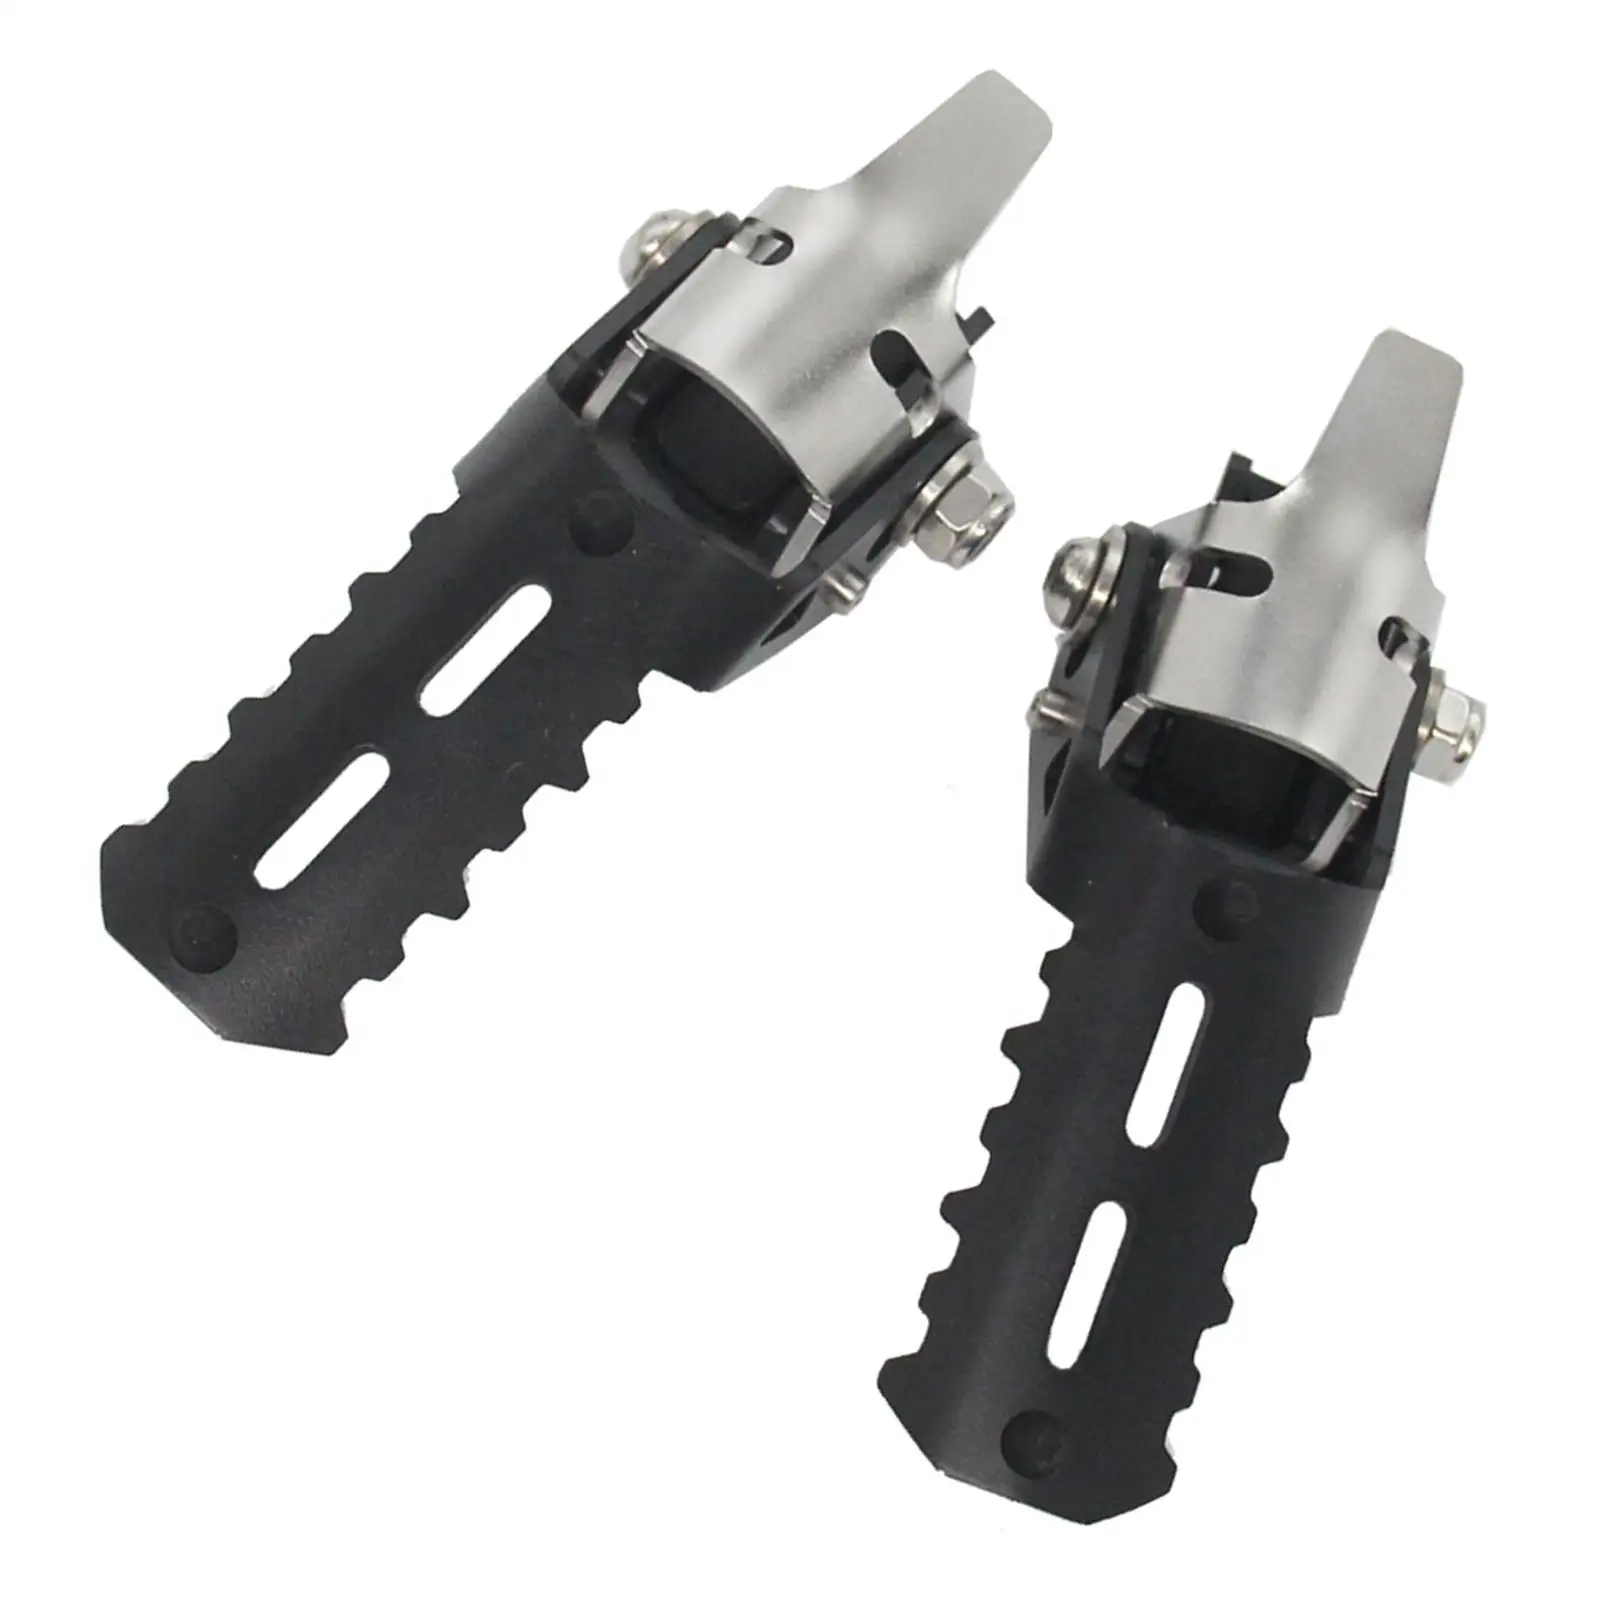 Highway Front Foot Pegs Diameter Tube 22-25mm for BMW R1250GS F750GS